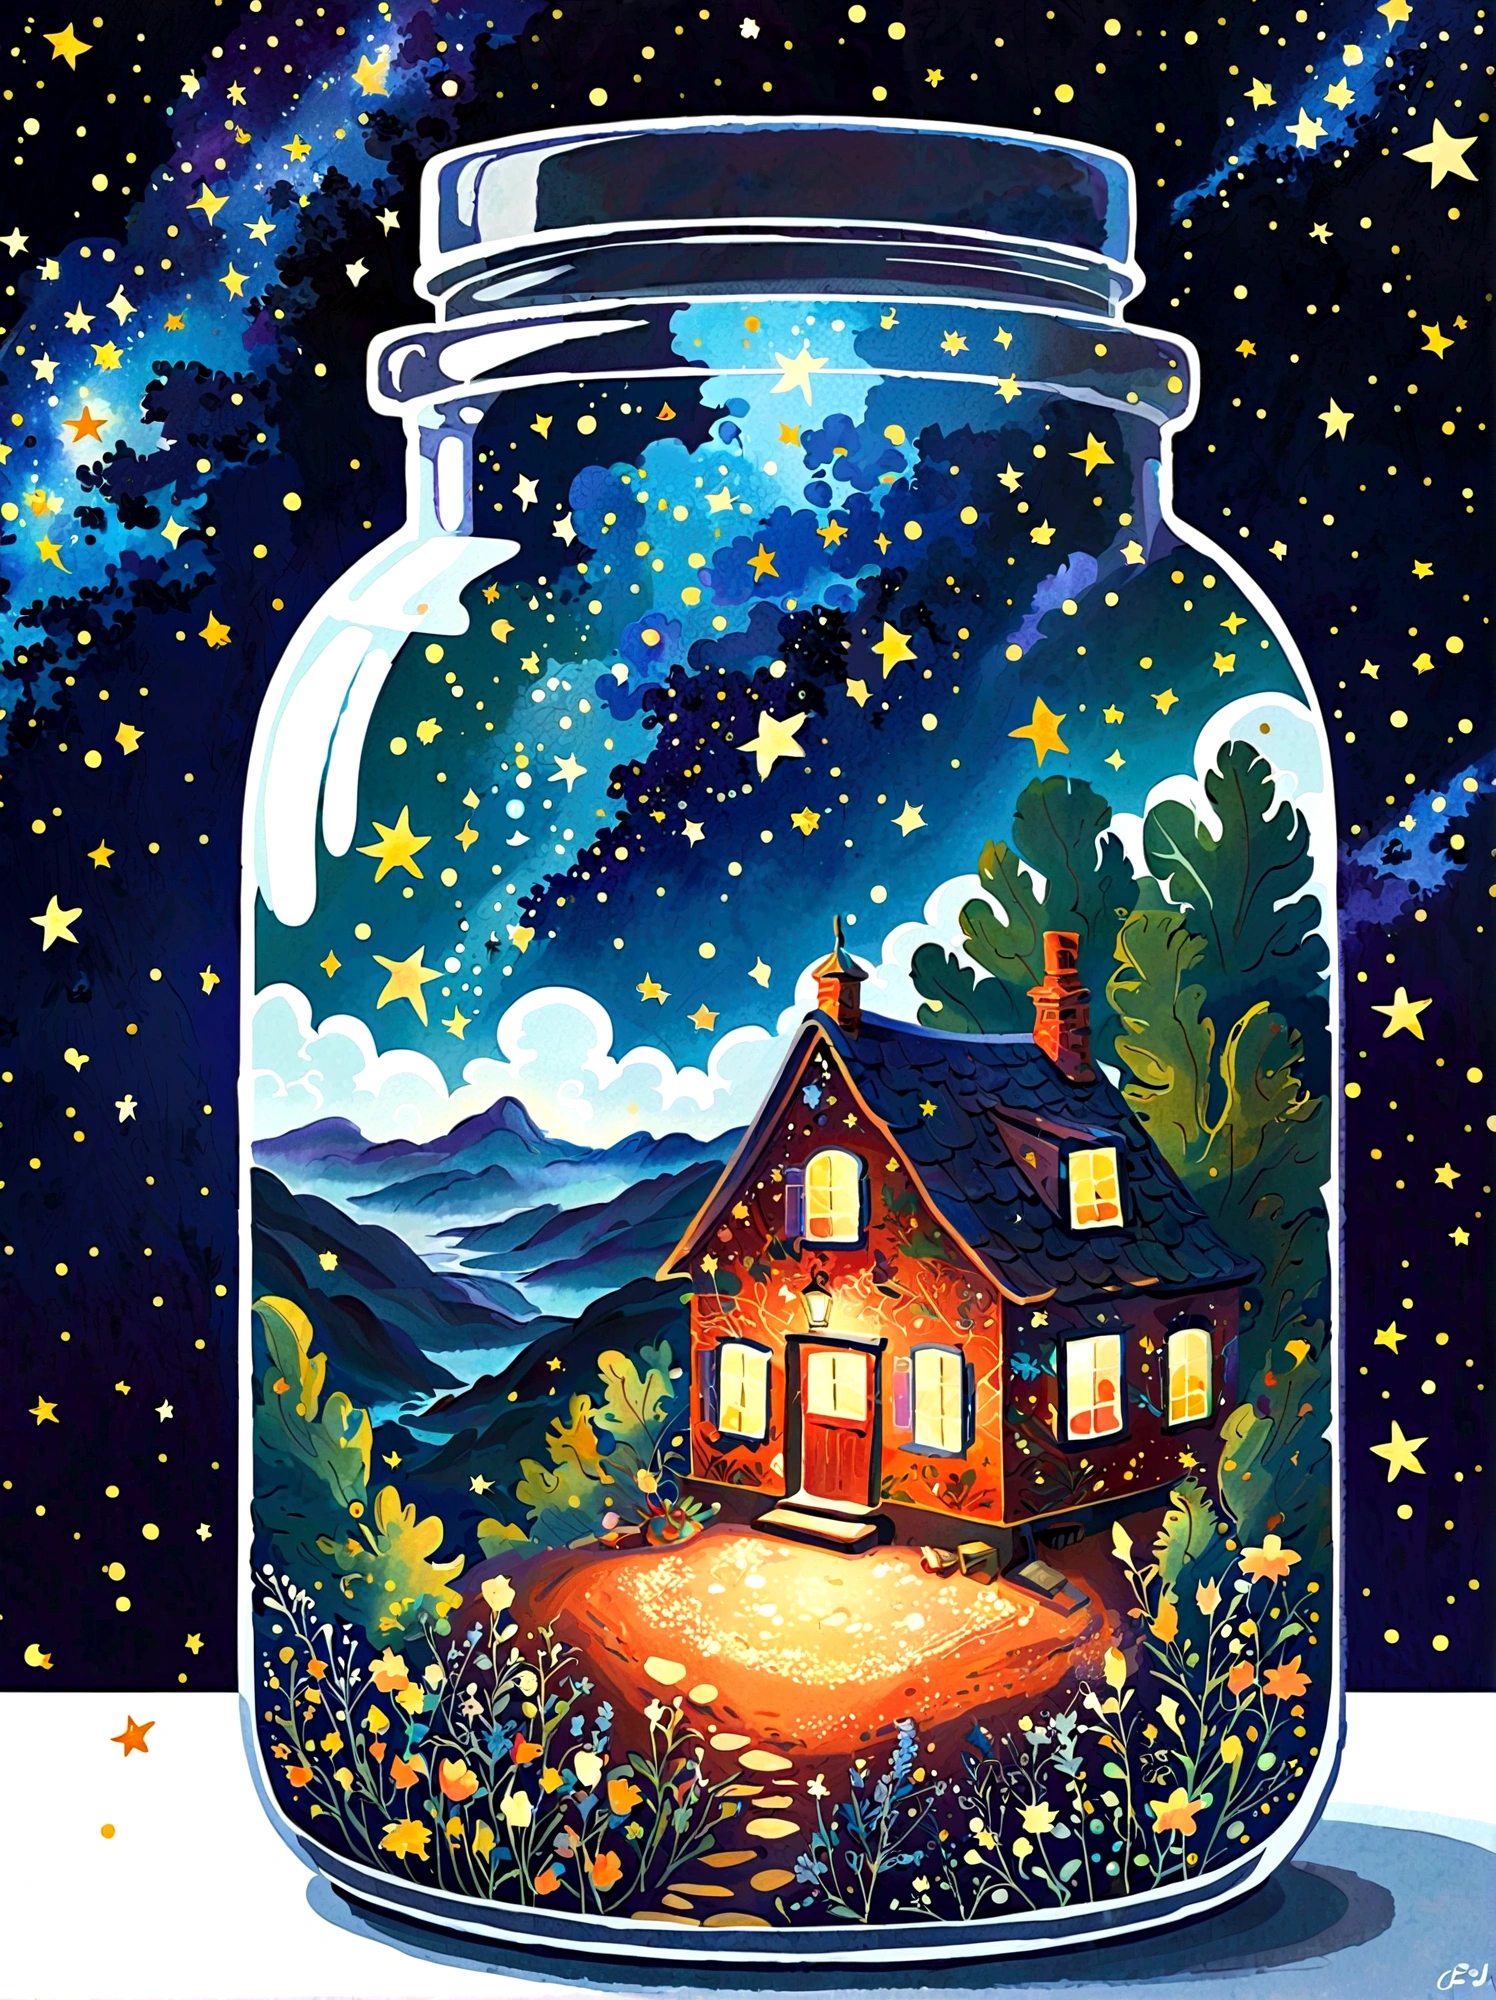 pzsj1, Masterpiece，Top quality，(Very delicate and beautiful starry sky scenery trapped in a jar), world masterpiece theater, High resolution isometric, Top quality, illustration, Thick coating, canvas, painting, realism, Realism